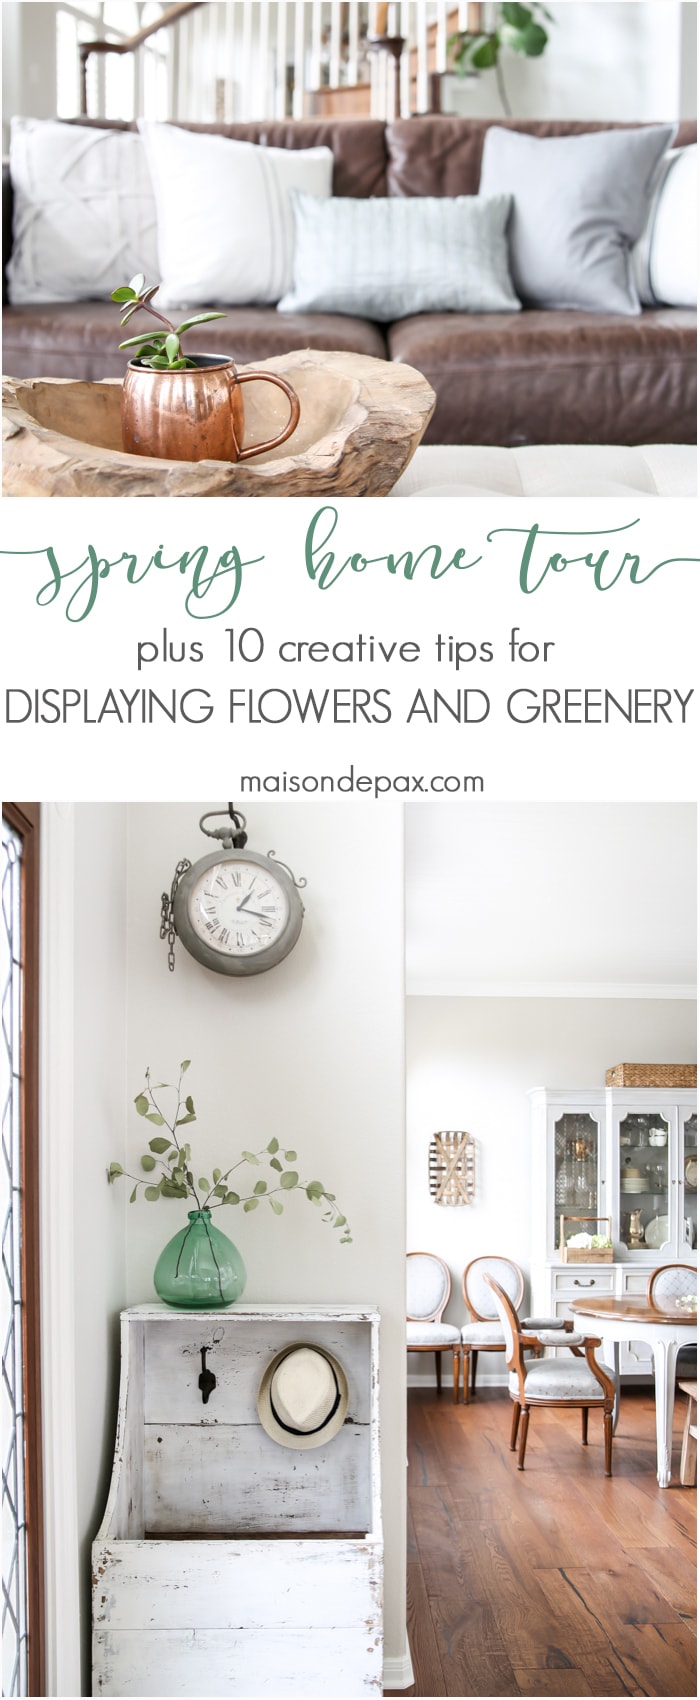 Spring Home Tour: What a beautiful home decorated with neutrals and light touches of greenery perfect for spring or summer | maisondepax.com